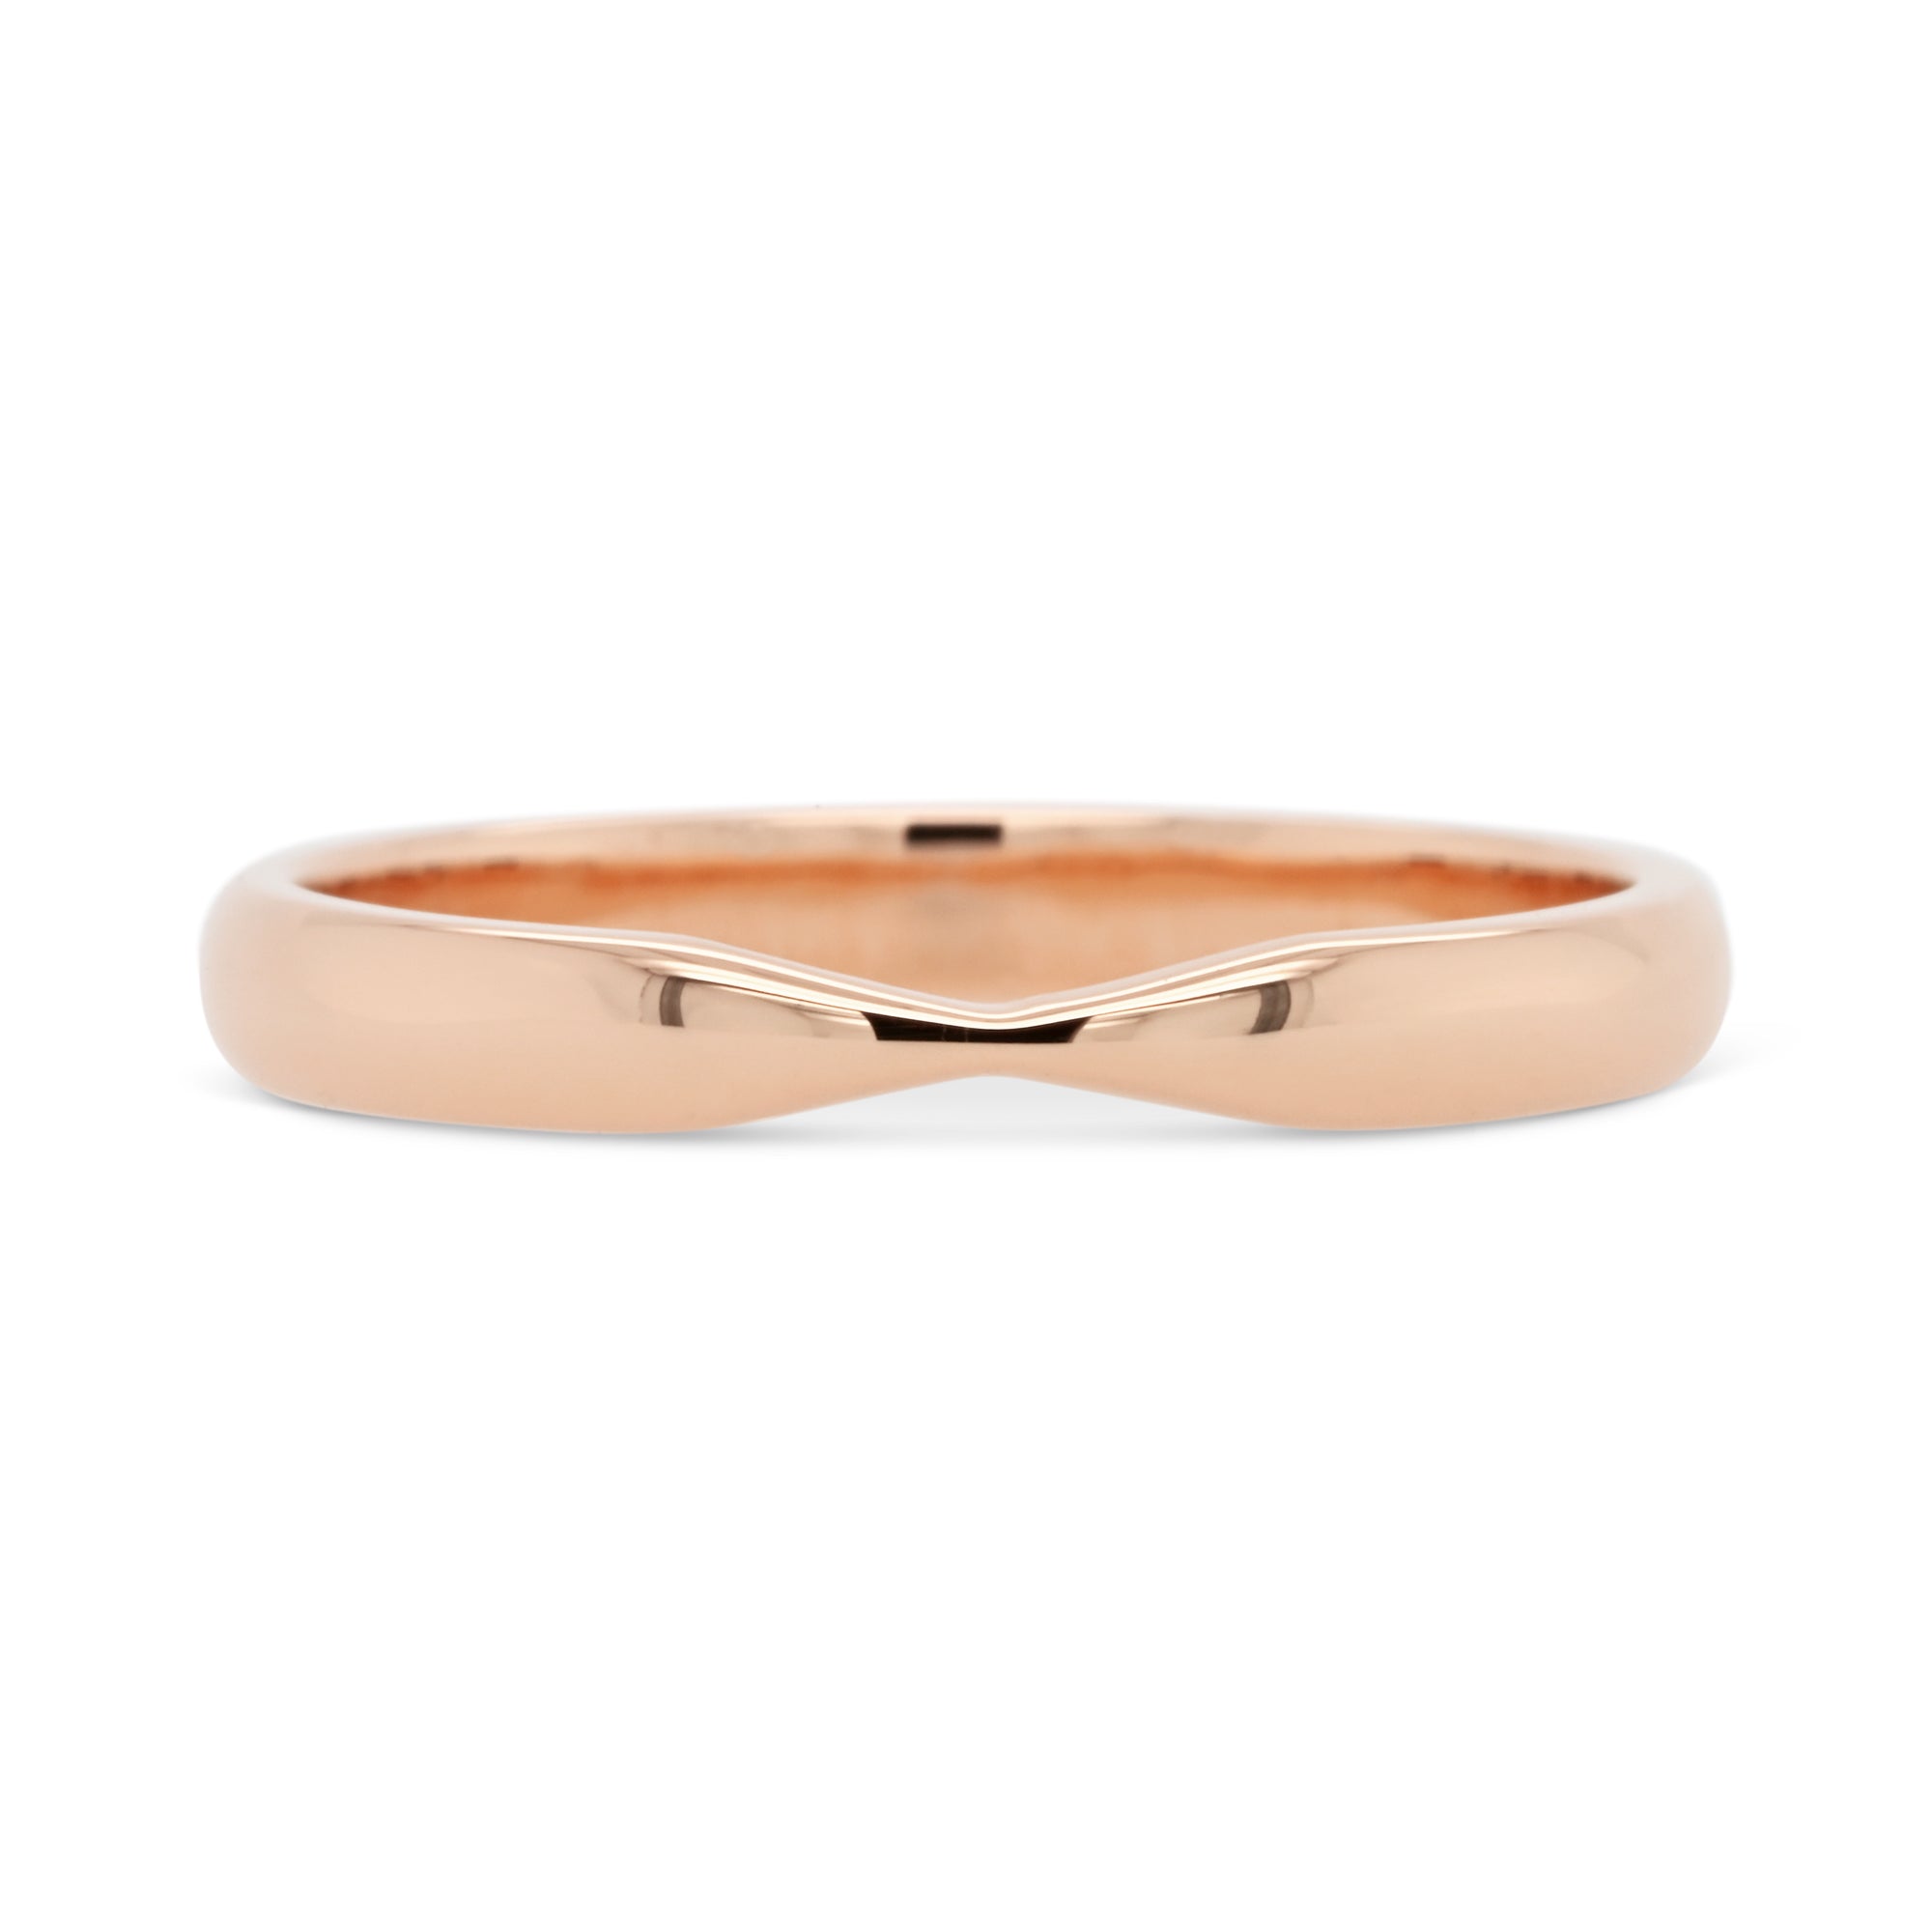 Gently tapered nesting wedding band in 14K rose gold